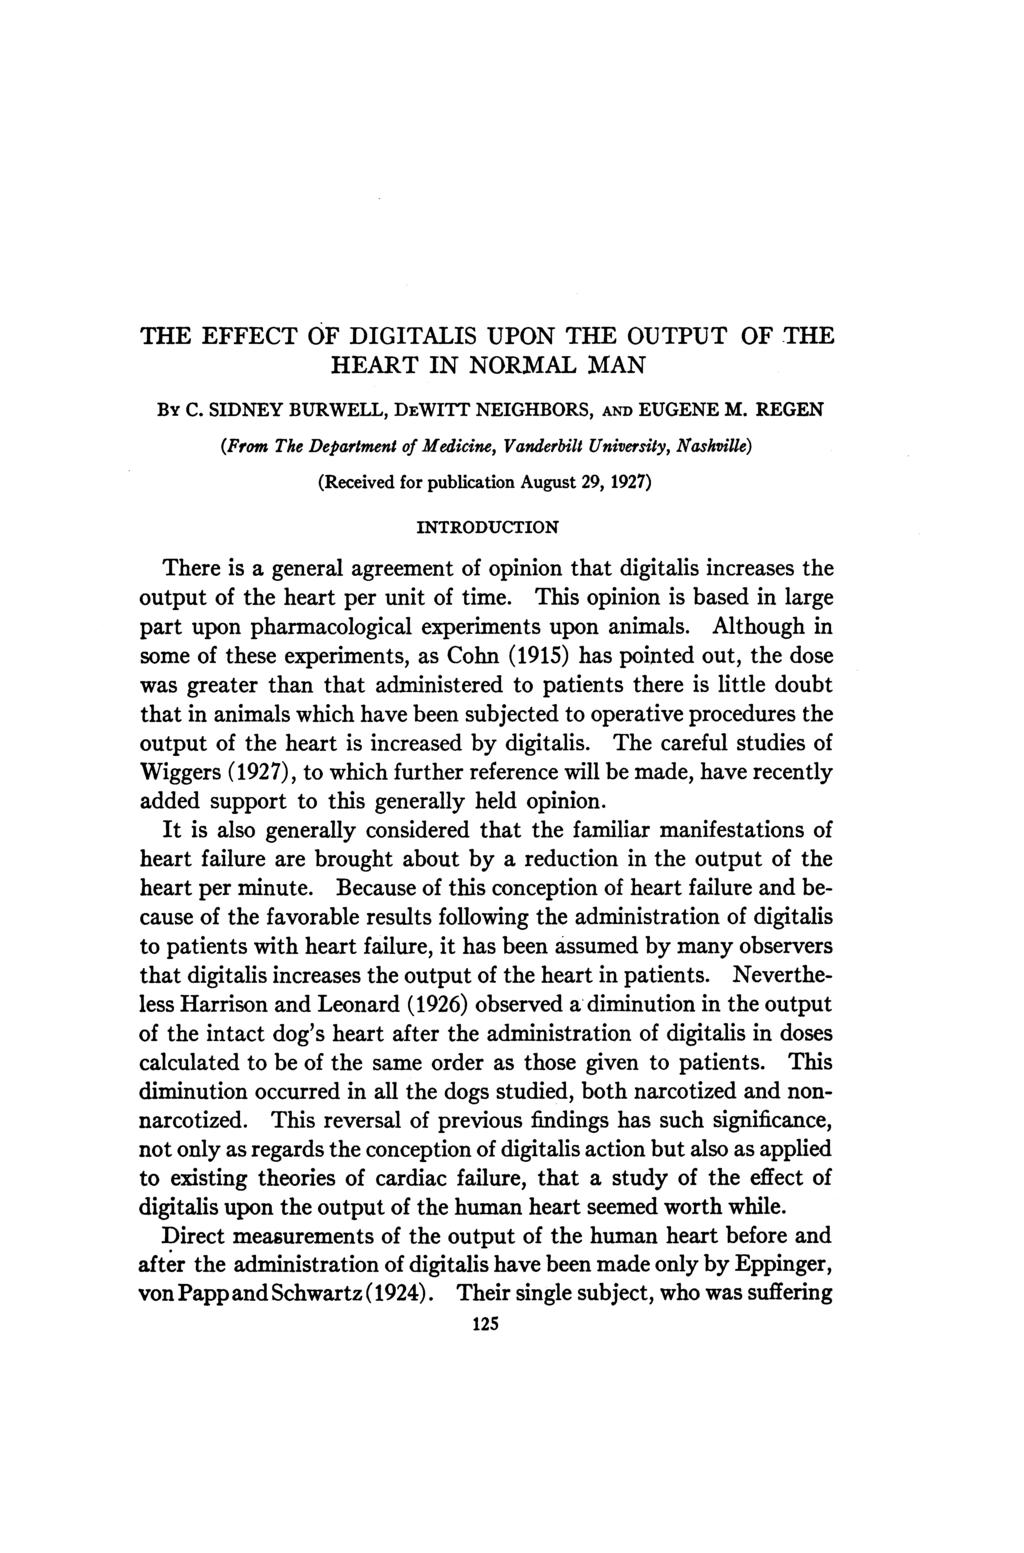 THE EFFECT OF DIGITALIS UPON THE OUTPUT OF THE HEART IN NORMAL MAN BY C. SIDNEY BURWELL, DEWITT NEIGHBORS, AND EUGENE M.